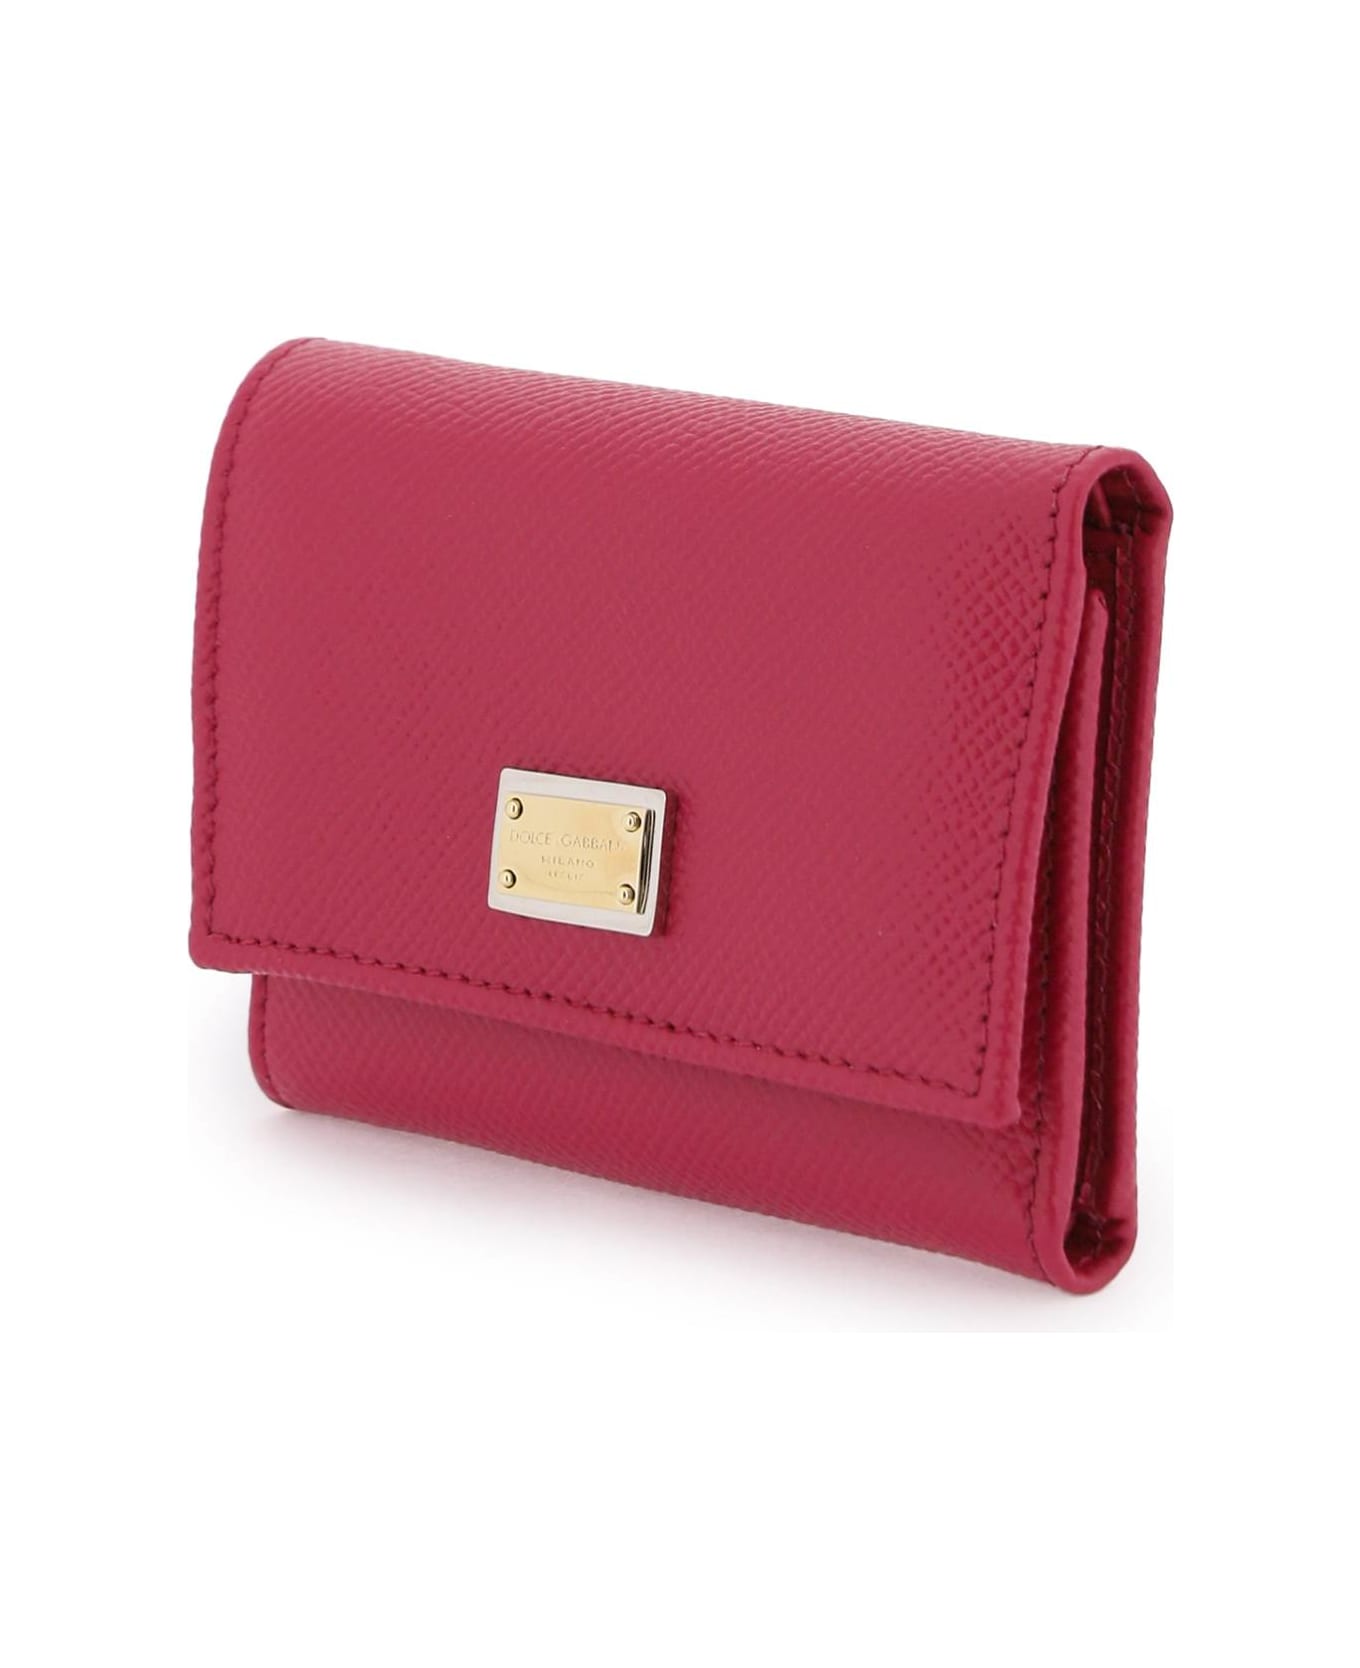 Dolce & Gabbana Leather Wallet - Pink